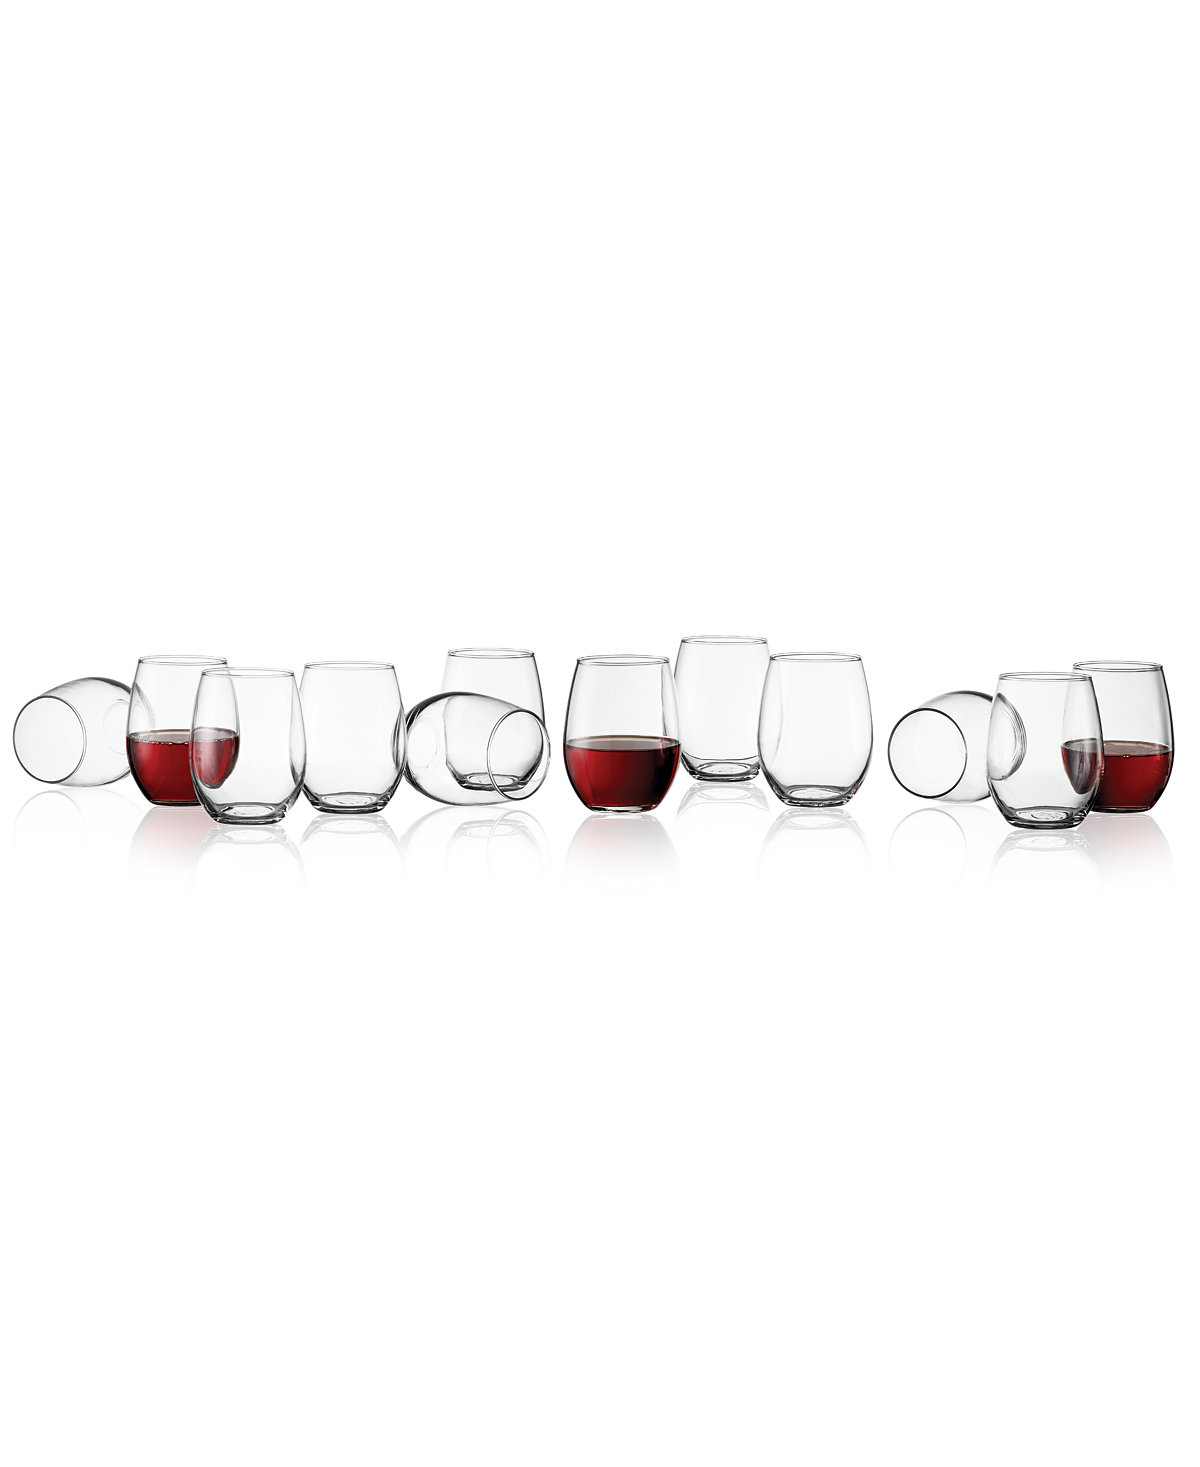 12 stemless wine glasses for $15, free store pickup